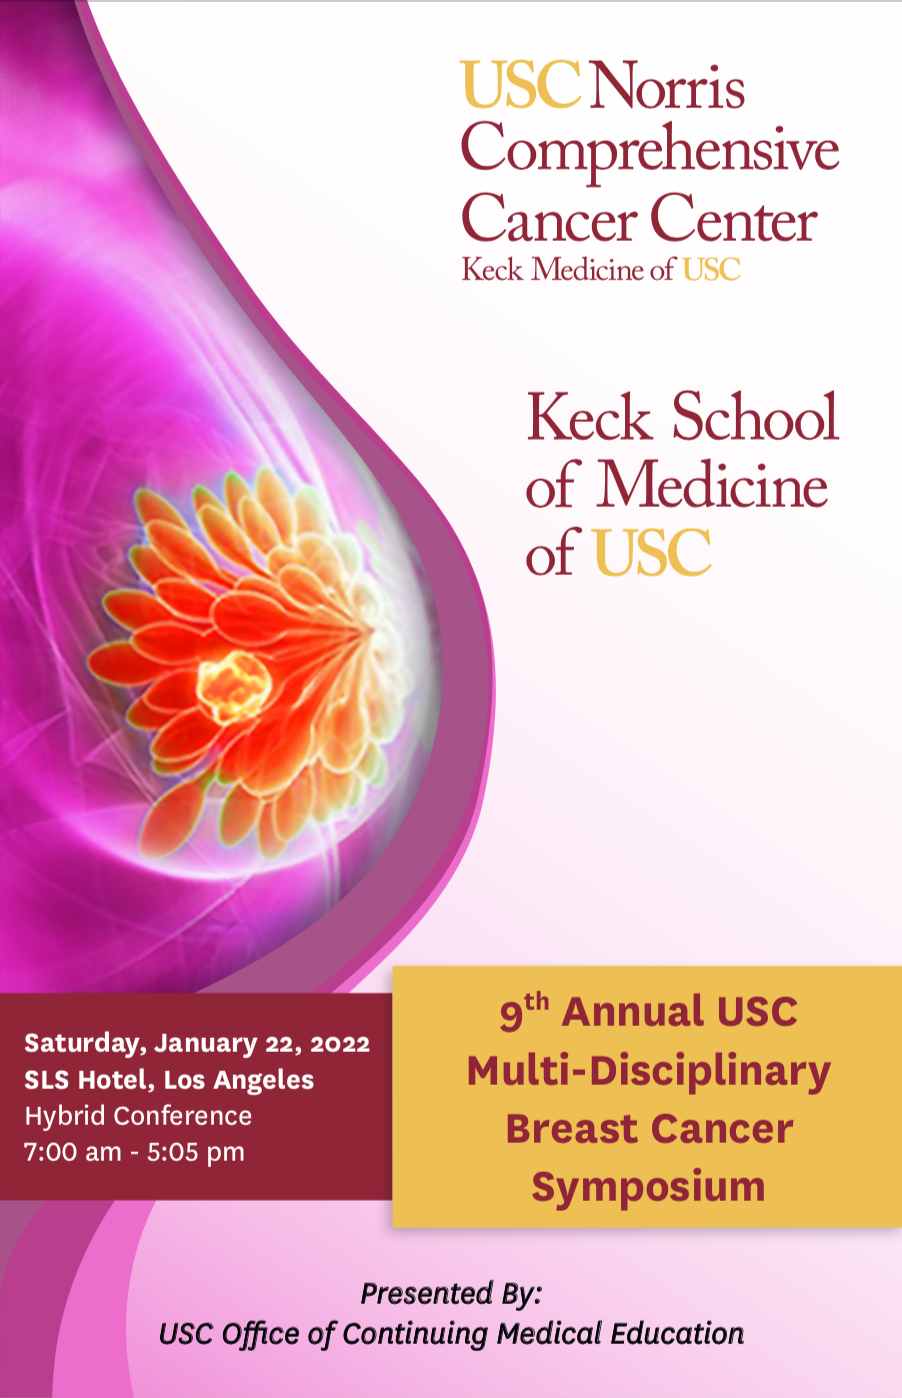 9th Annual USC Multi-Disciplinary Breast Cancer Symposium Banner